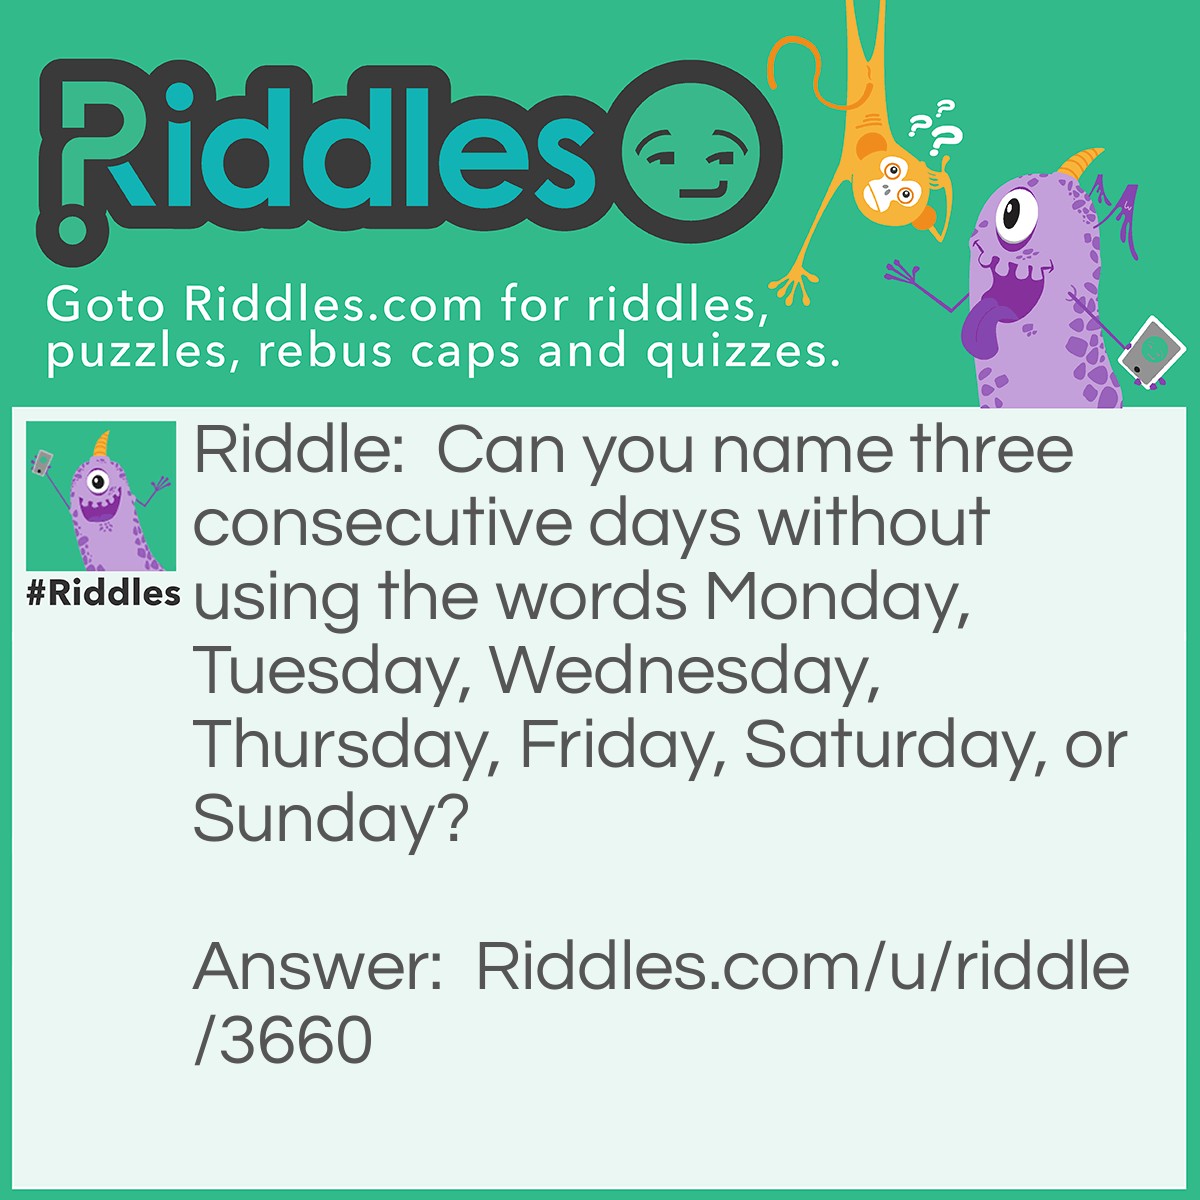 Riddle: Can you name three consecutive days without using the words Monday, Tuesday, Wednesday, Thursday, Friday, Saturday, or Sunday? Answer: Today, Tomorrow, and Yesterday.